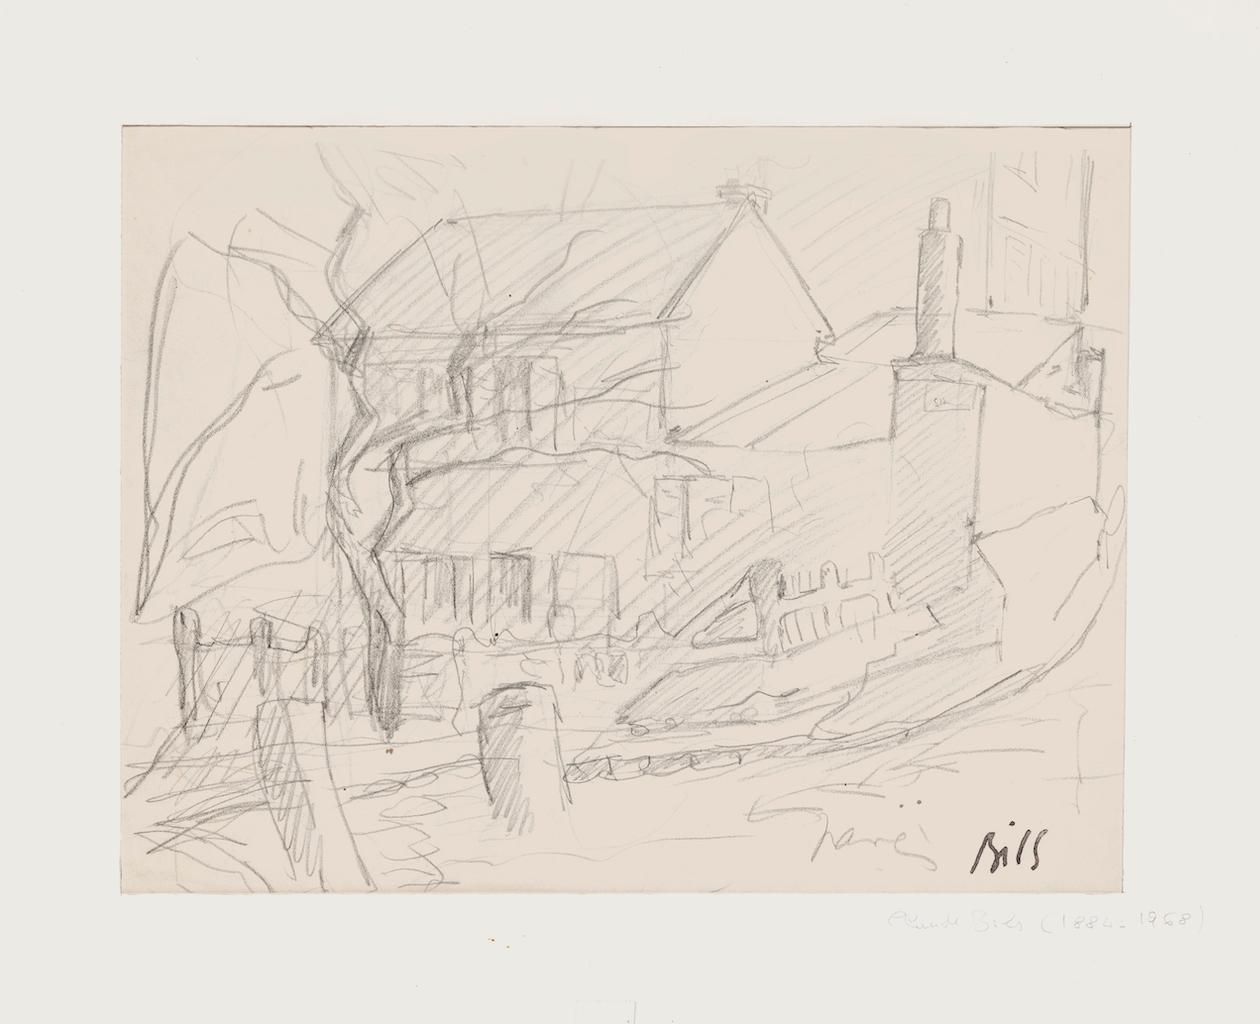 Household is an original drawing in pencil on paper realized by an Claude Bils in 1950s

The State of preservation is good except for some small foldings.

Signed on the lower right.

Passepartout included 40.5 x 33.5

The artwork represents the